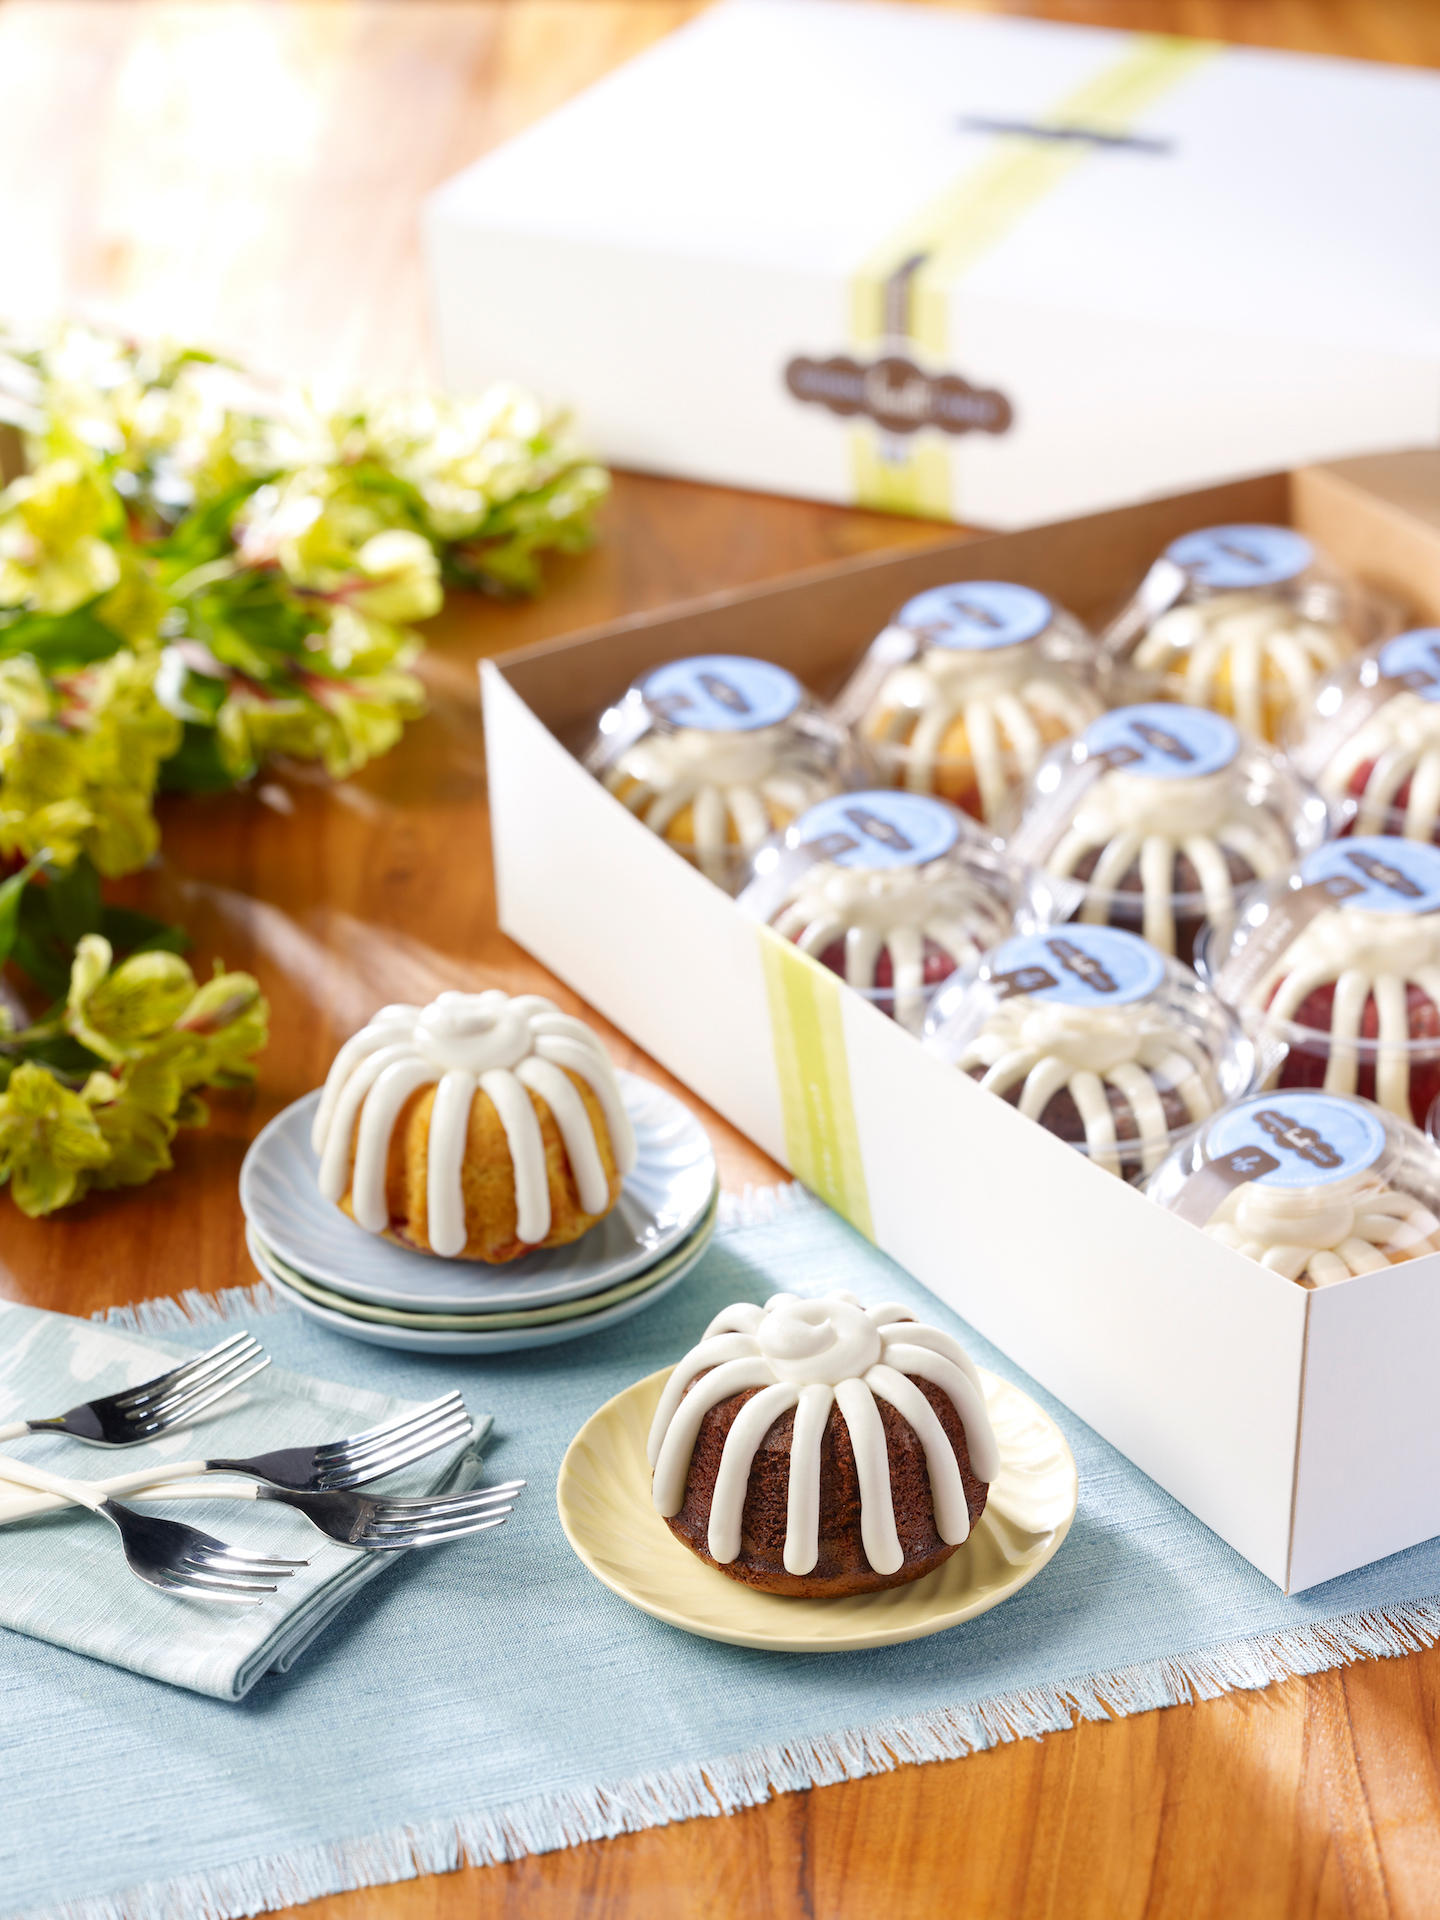 Nothing Bundt Cakes Pflugerville Delivery welshcycling